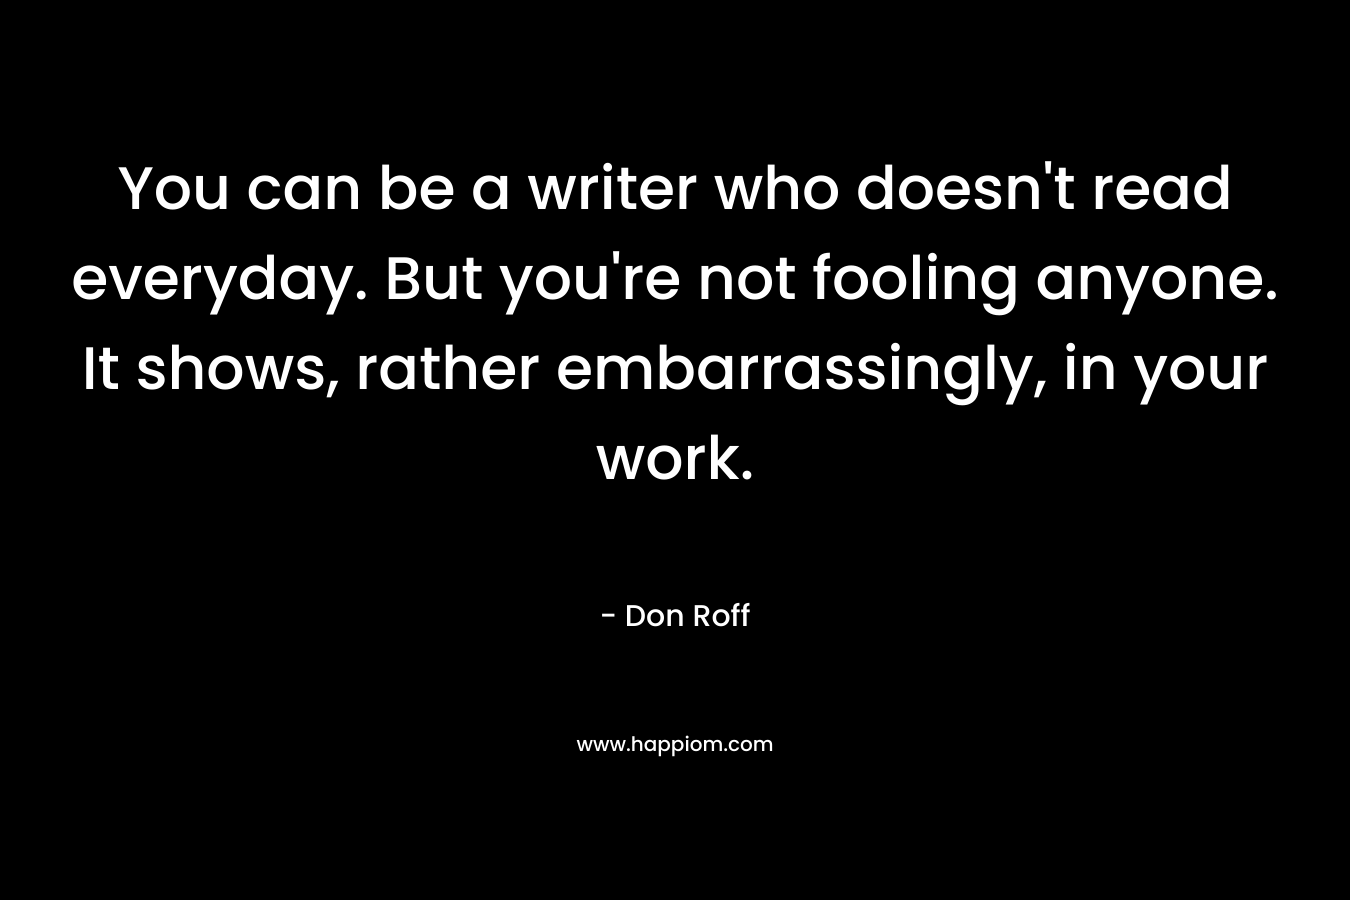 You can be a writer who doesn’t read everyday. But you’re not fooling anyone. It shows, rather embarrassingly, in your work. – Don Roff